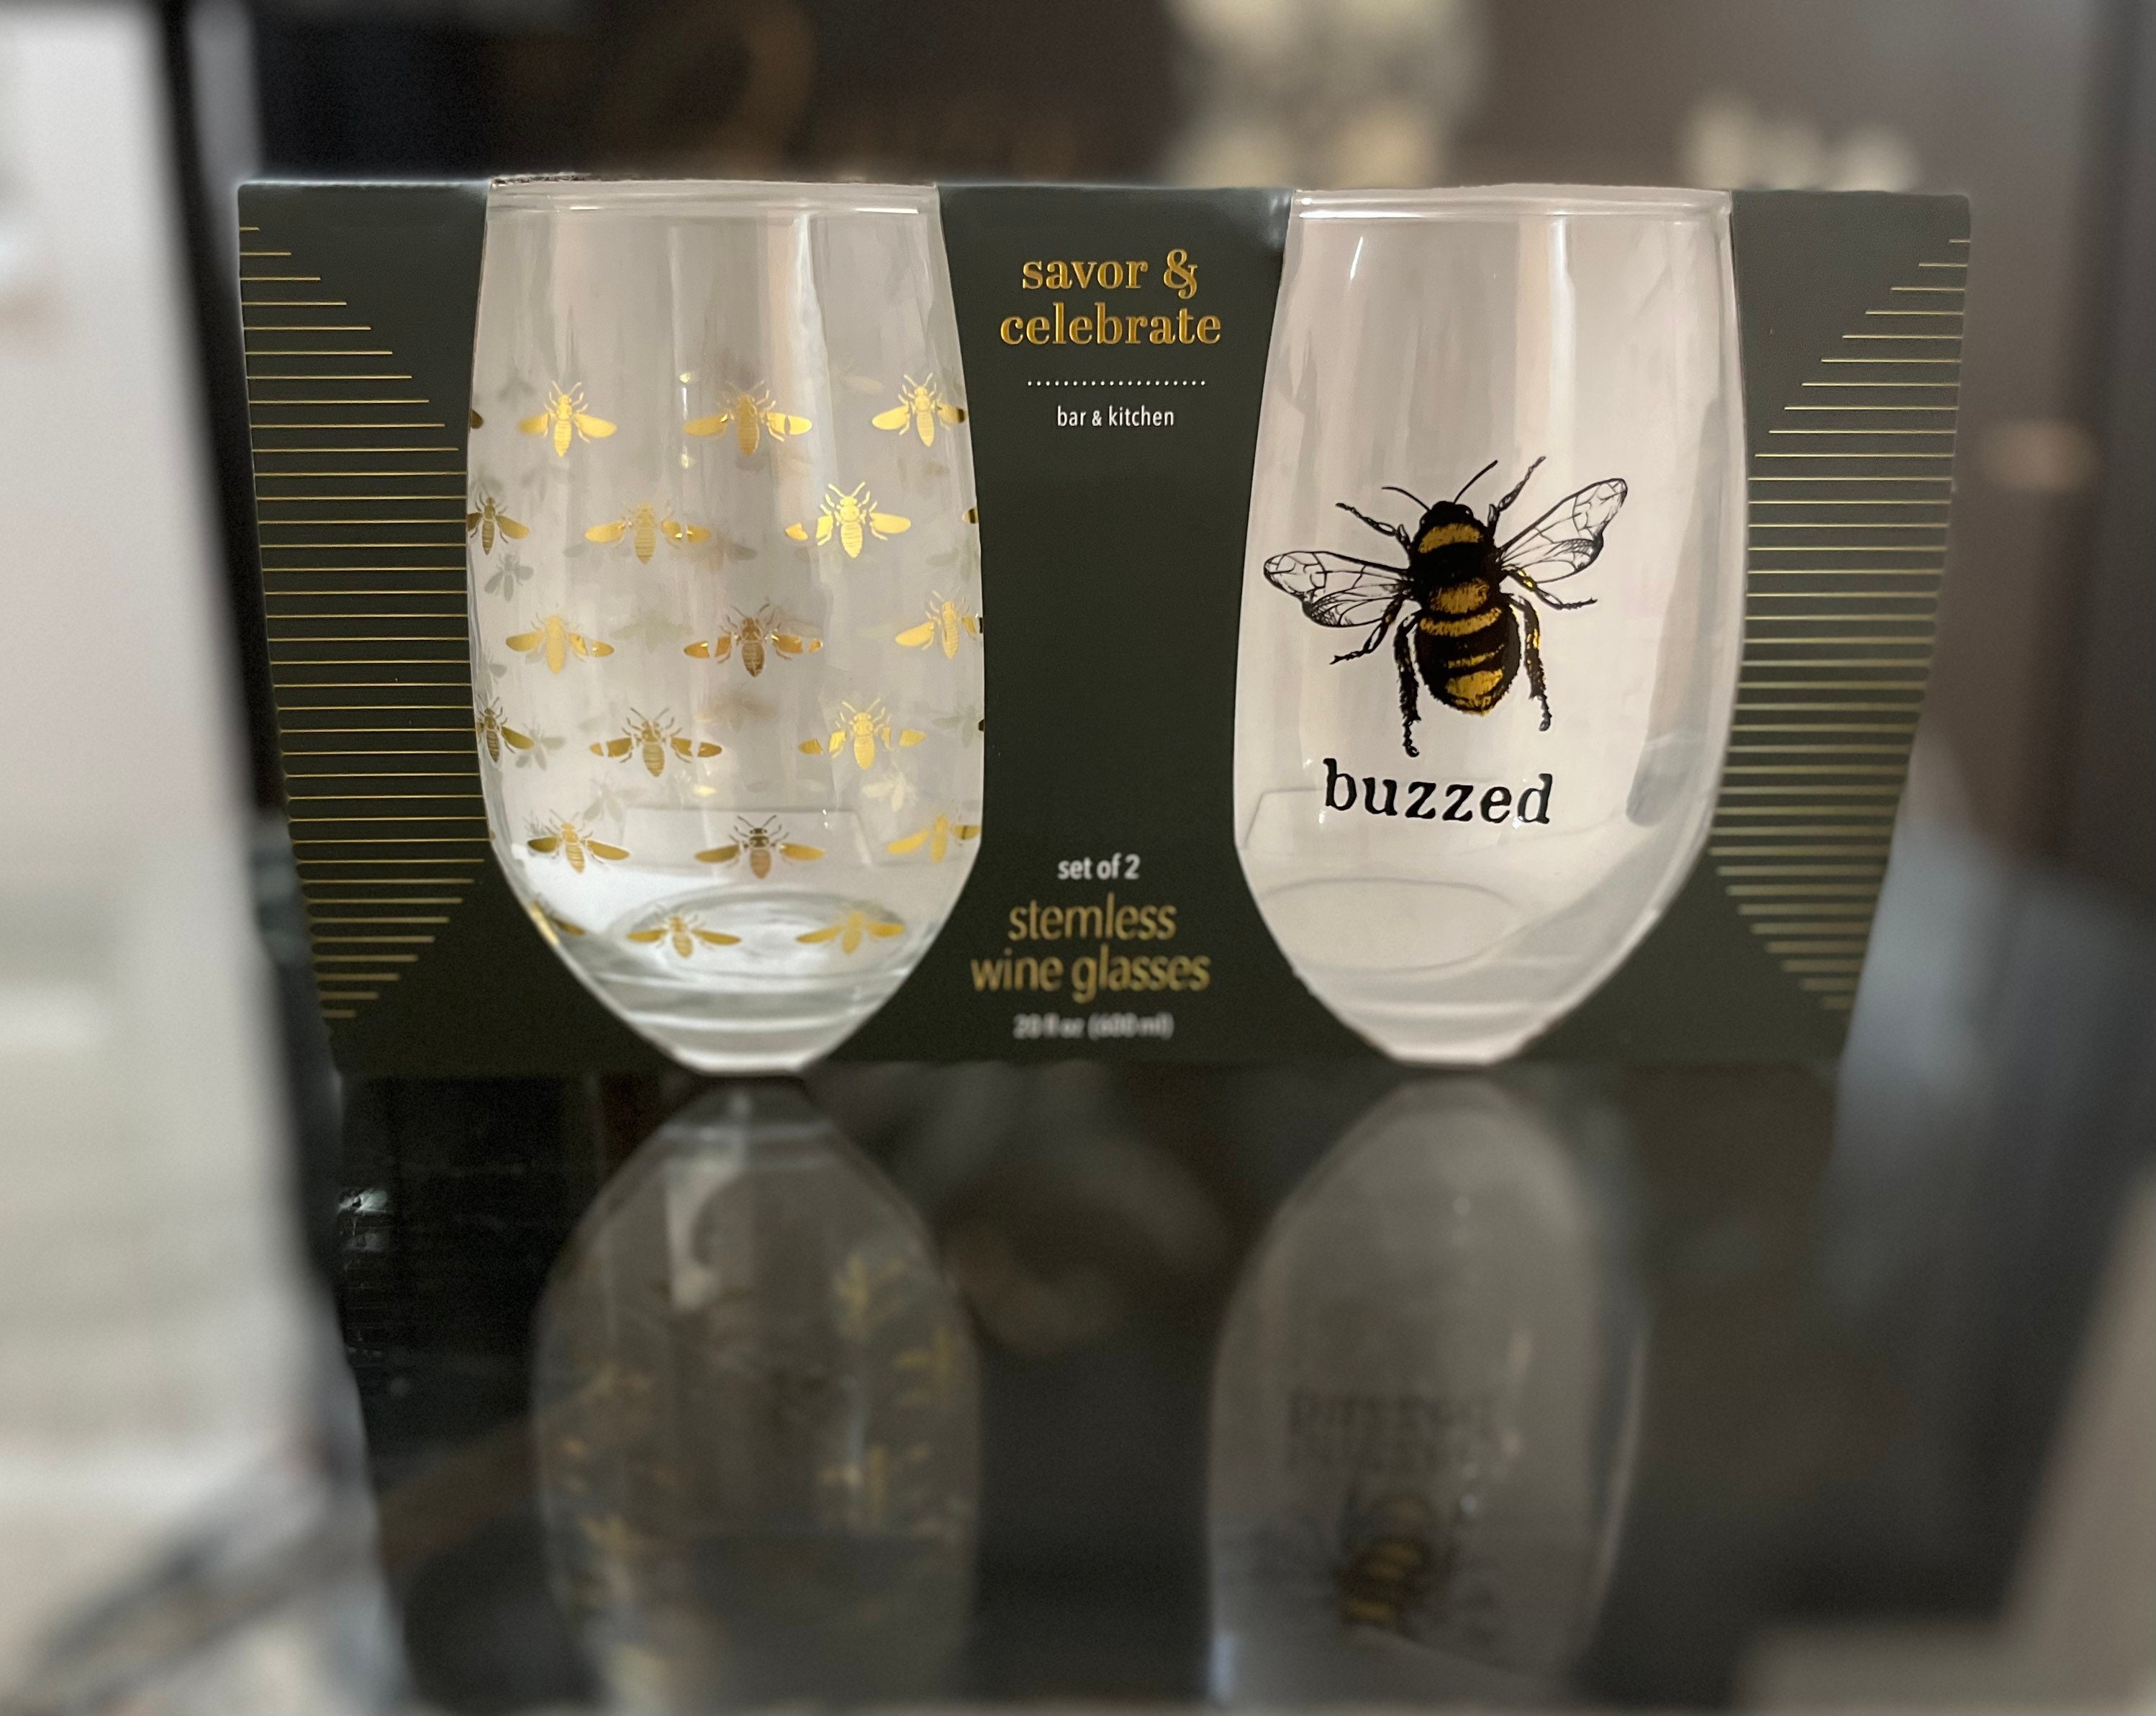 Bee Engraved Style Wine/Water Glasses - Set of 2